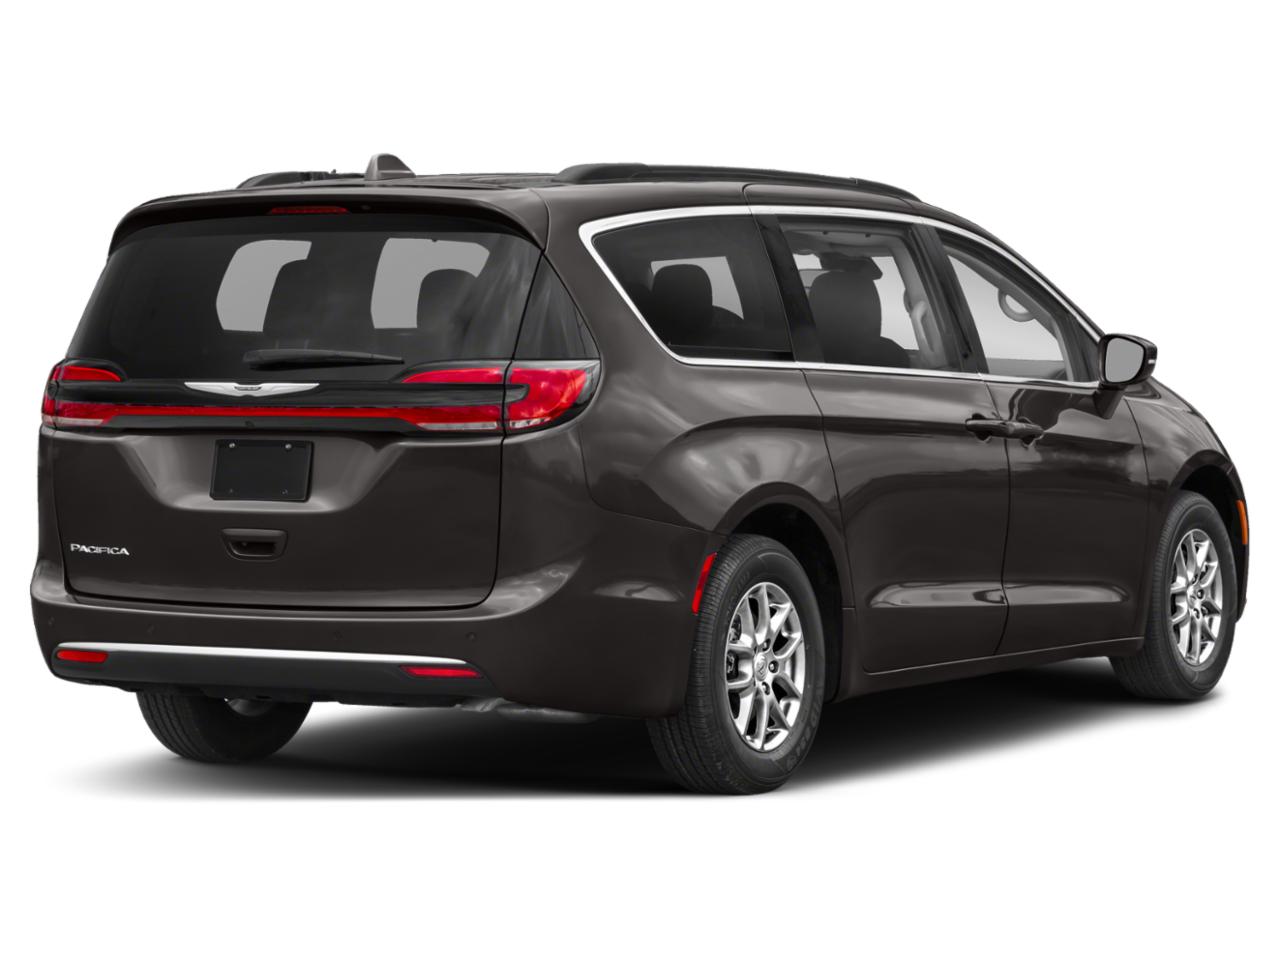 2022 Chrysler Pacifica Vehicle Photo in Highland, IN 46322-2506